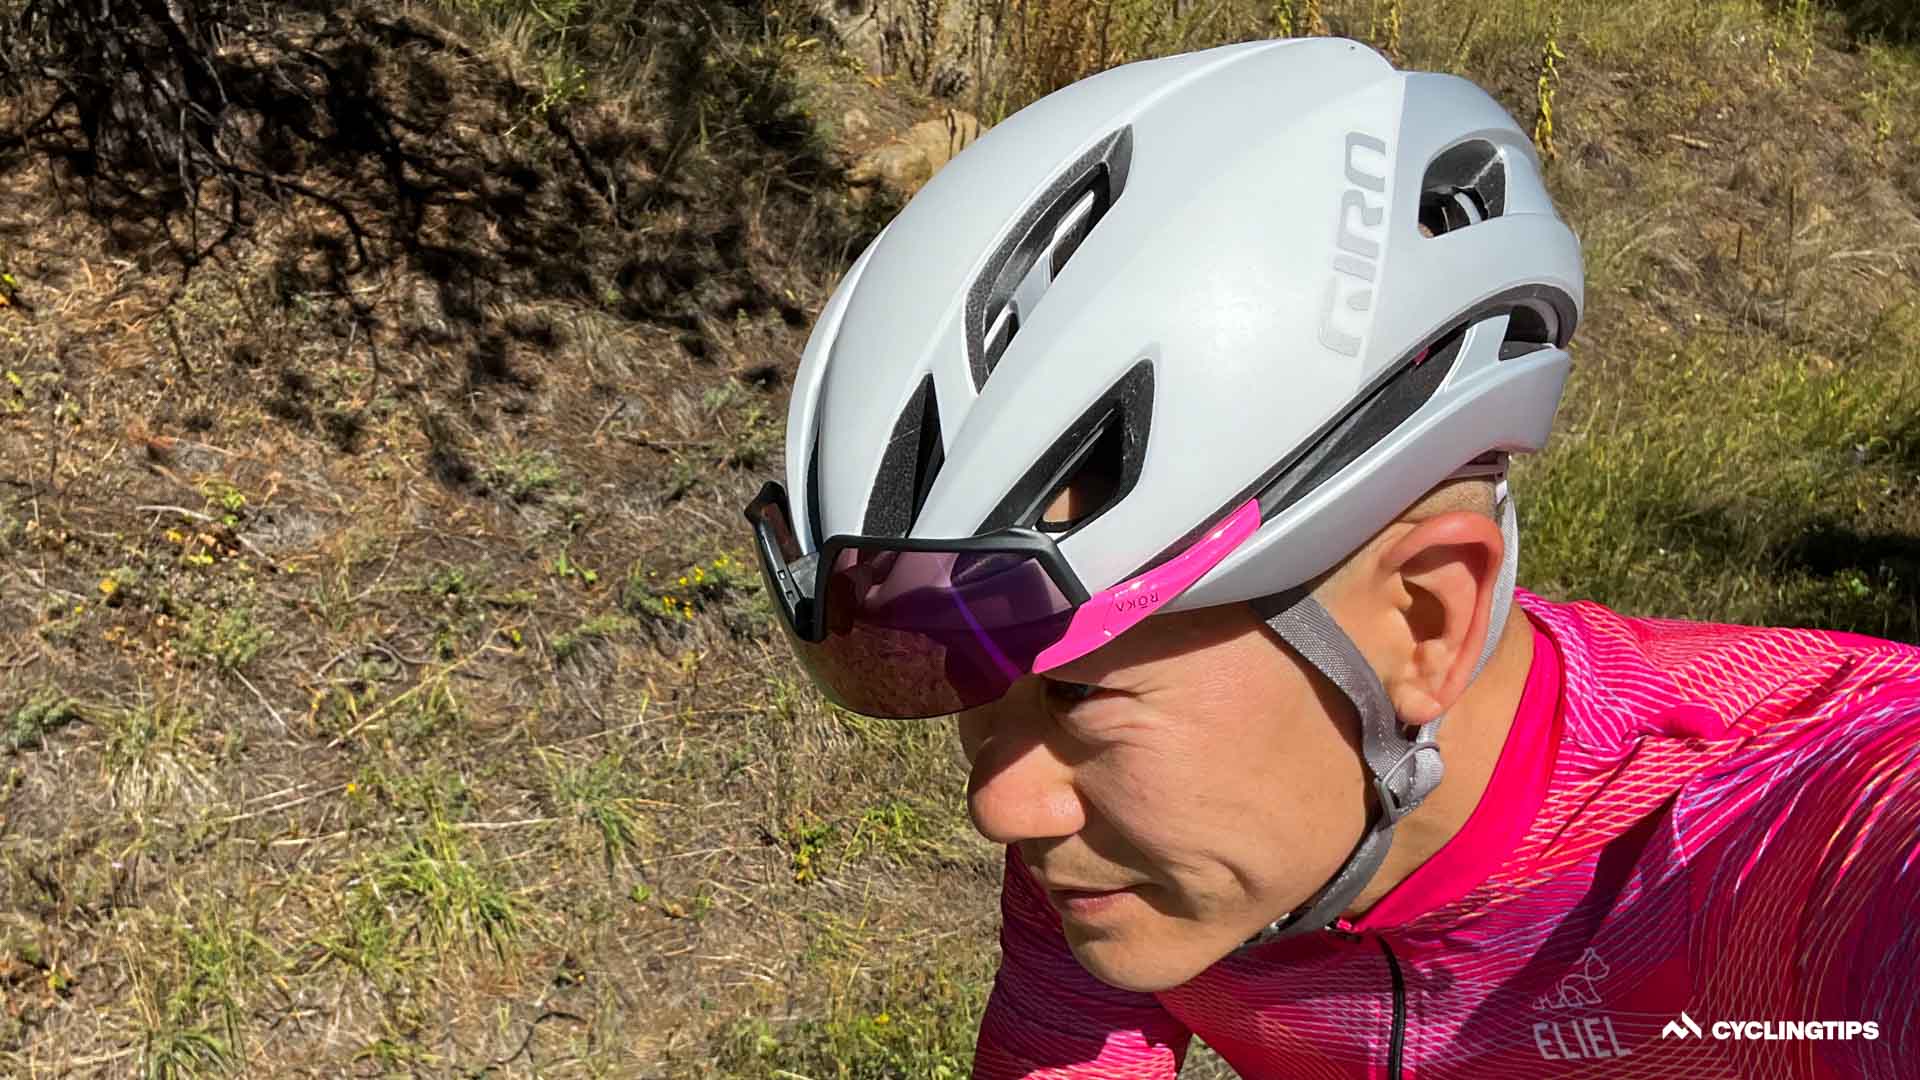 Giro Eclipse Spherical helmet review: Free speed without the usual 